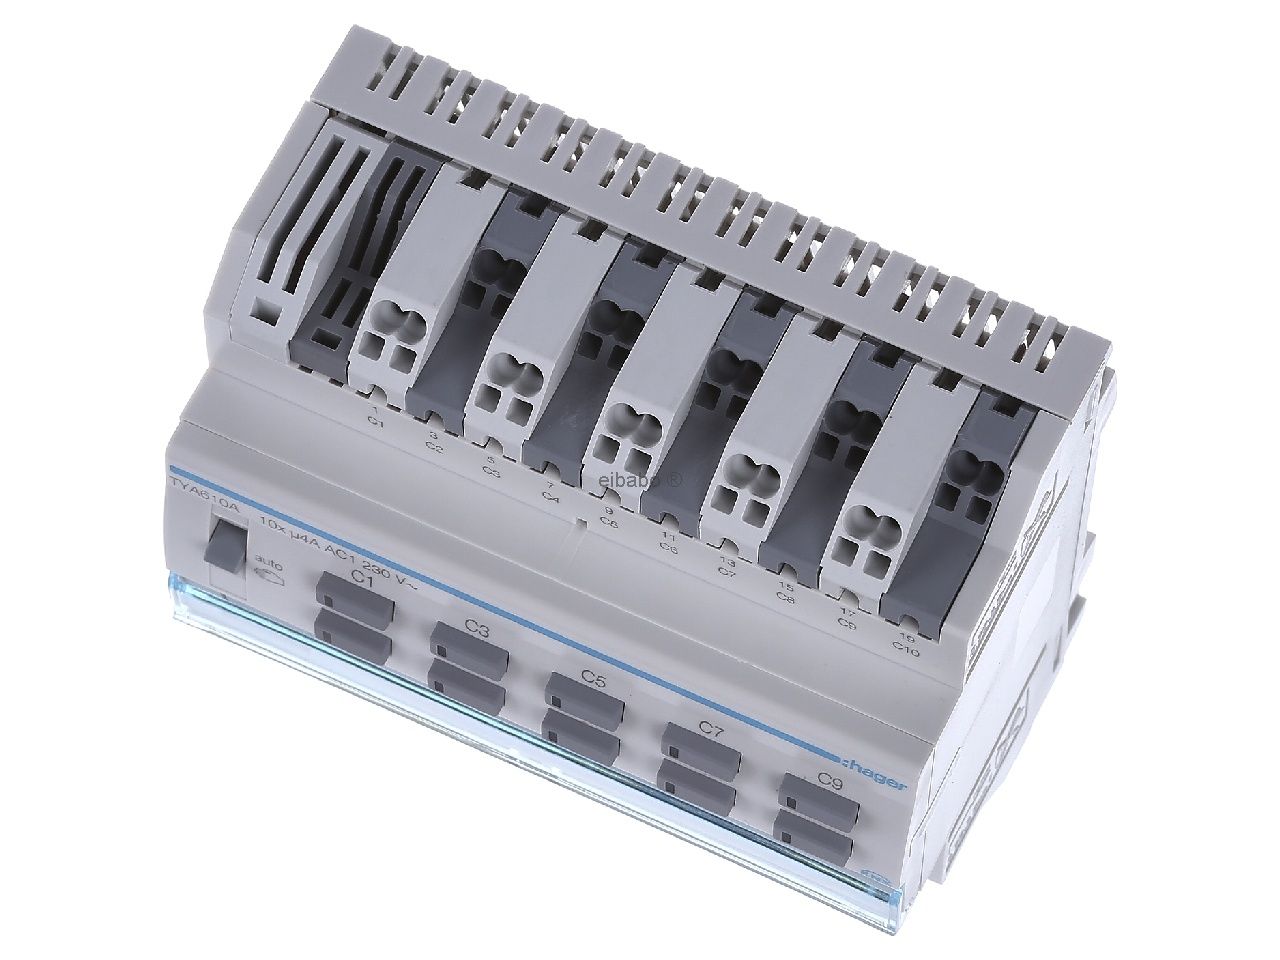 Hager TYA610A Channel Switch Shutter Actuator Output Module 4A 230V AC RMD in Pakistan